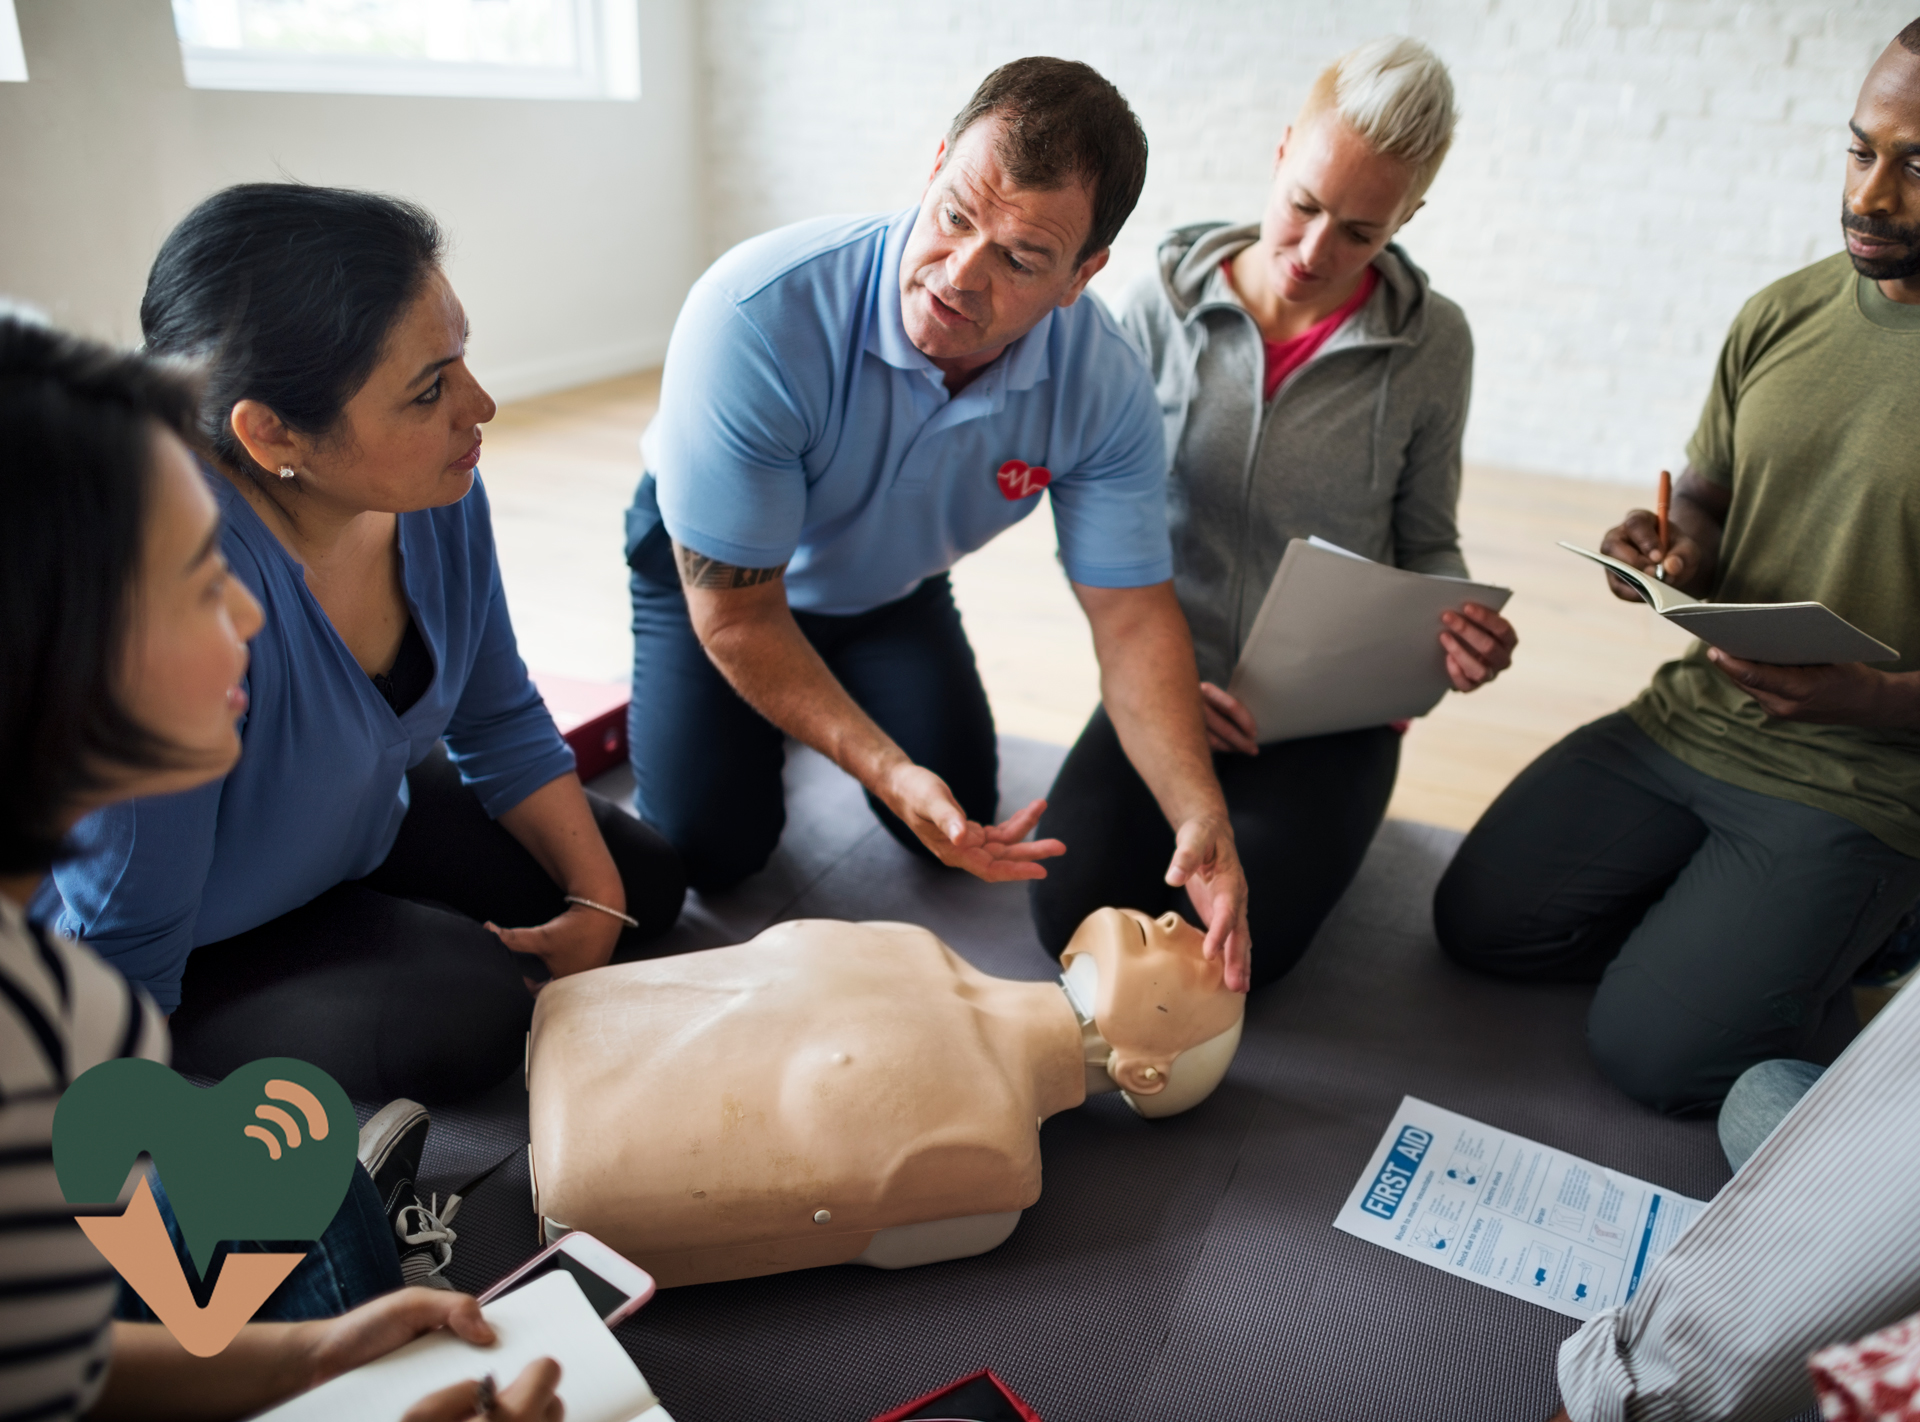 cpr-first-aid-training-class